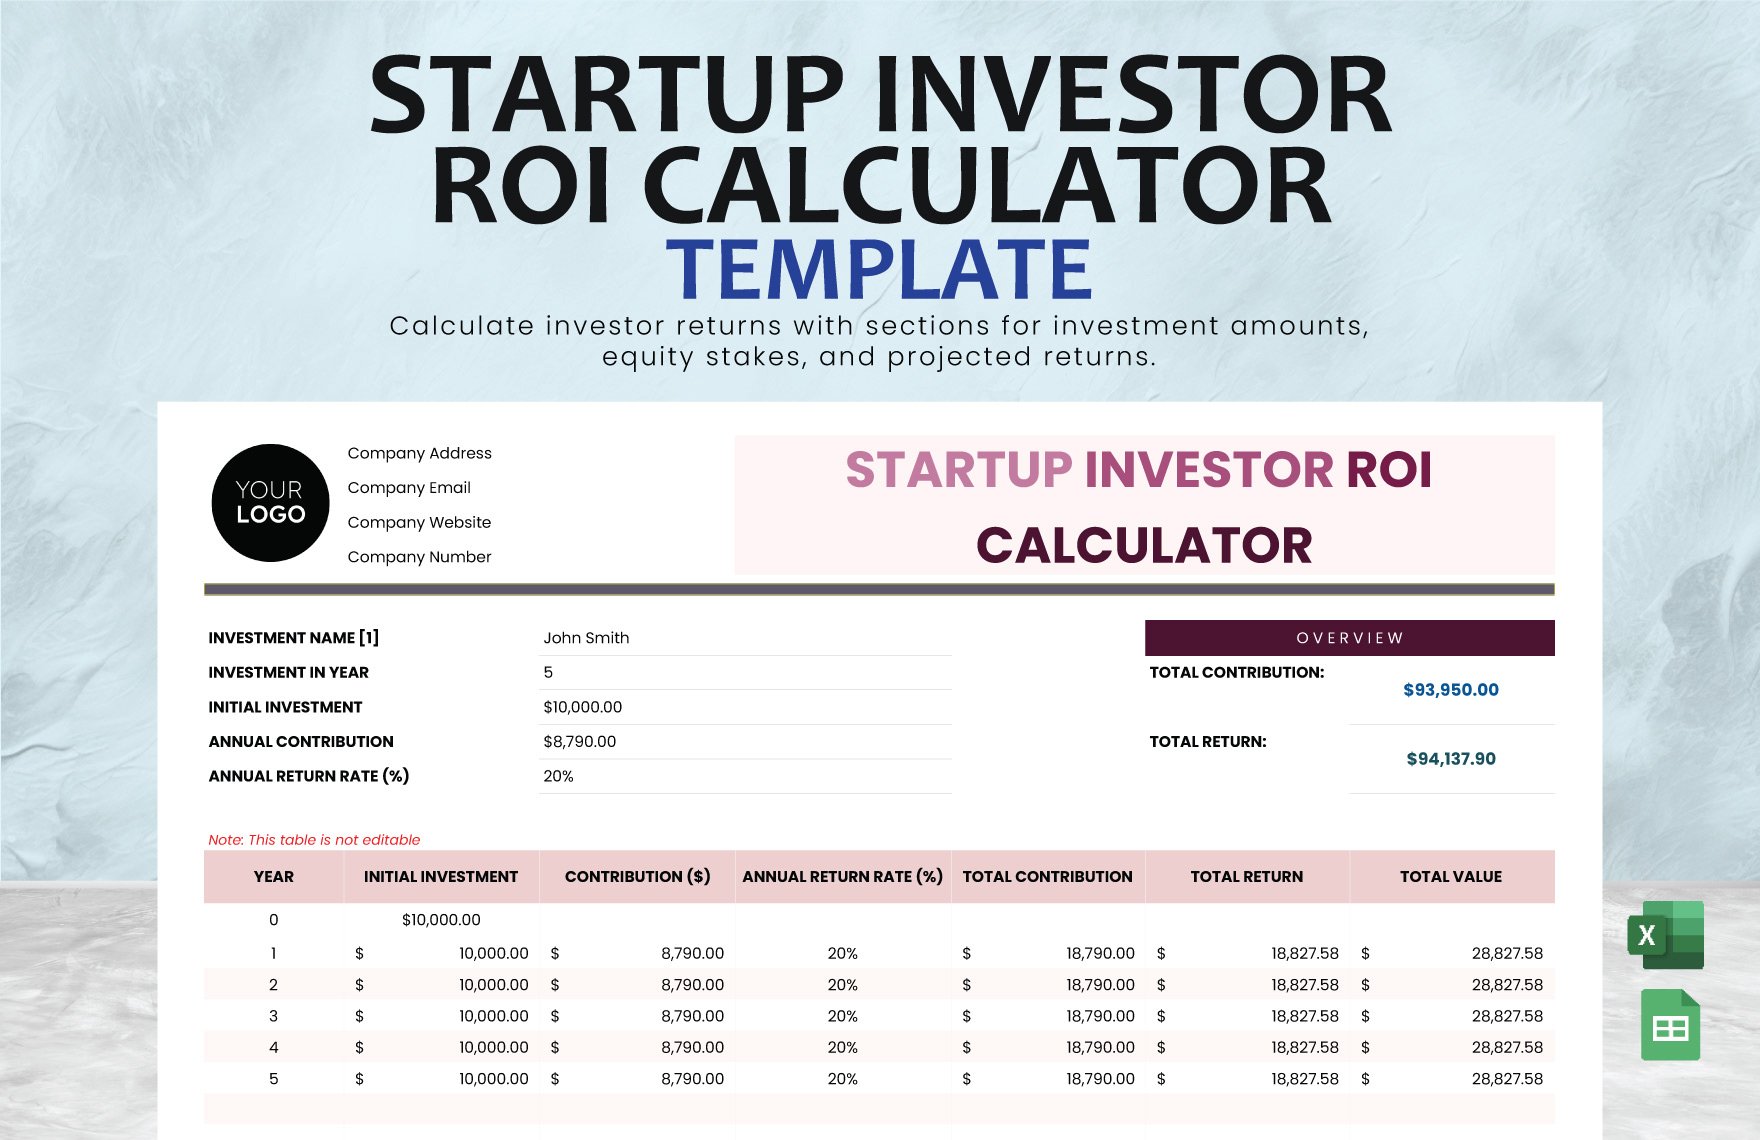 Startup Investor ROI Calculator Template in Excel, Google Sheets